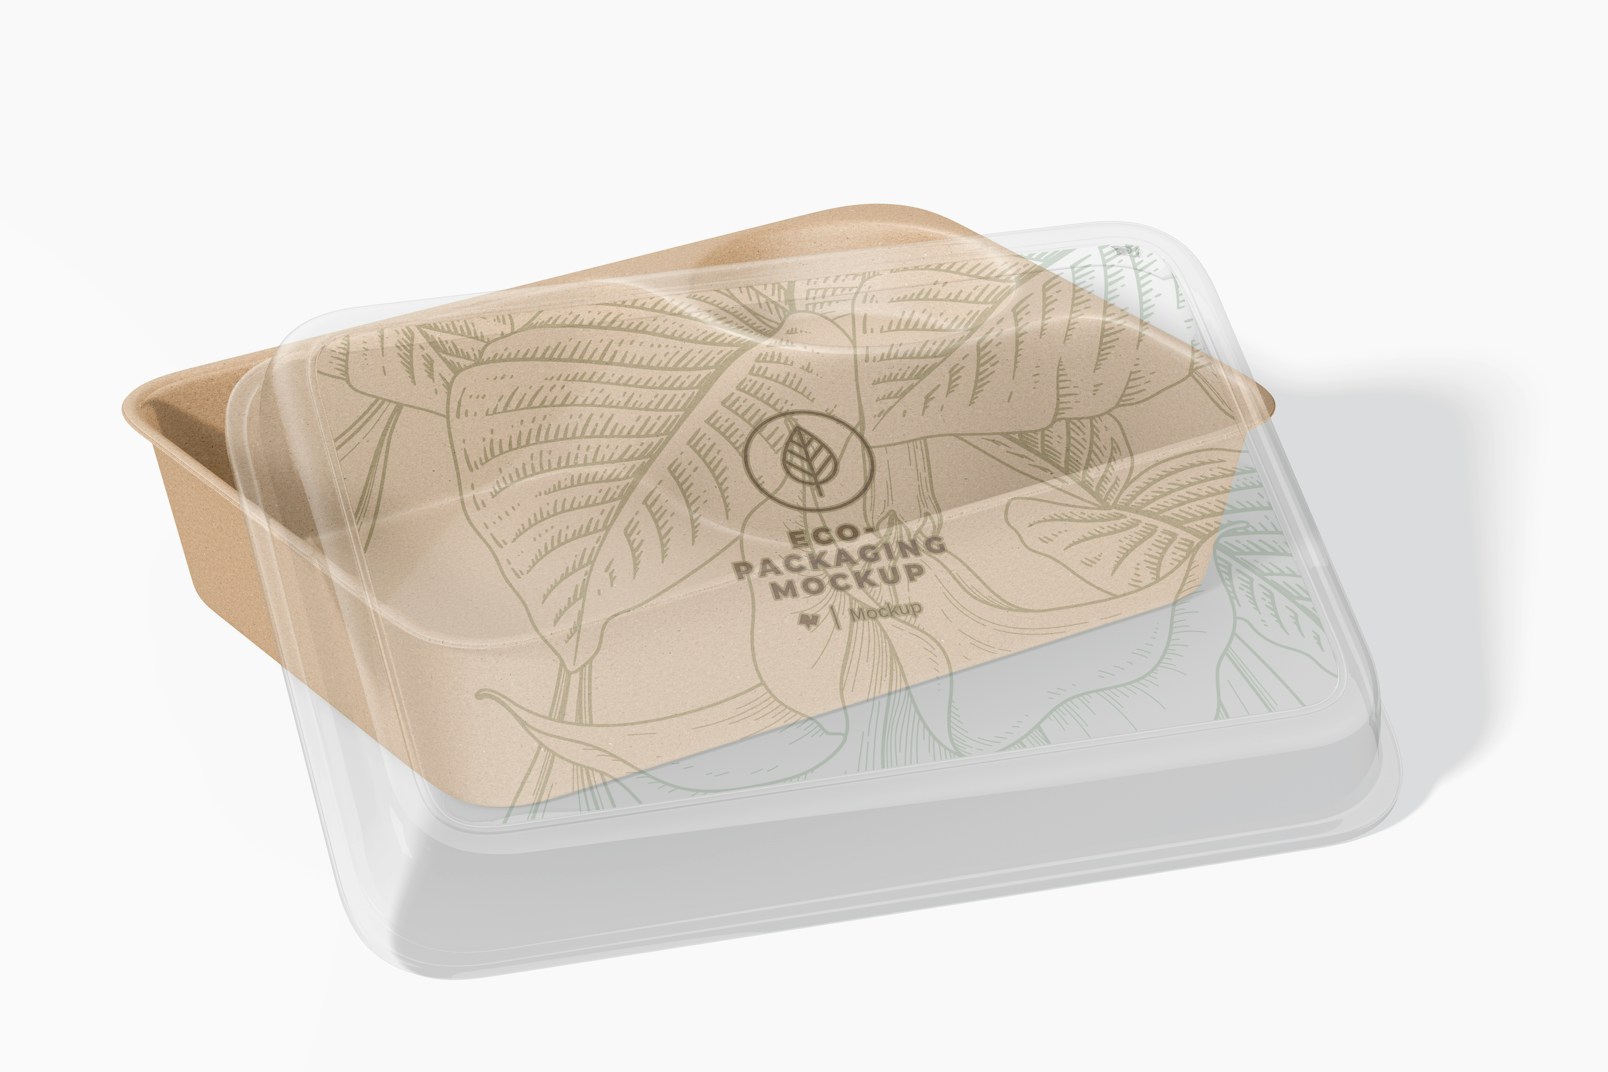 Eco Rectangular Food Container Mockup, Opened